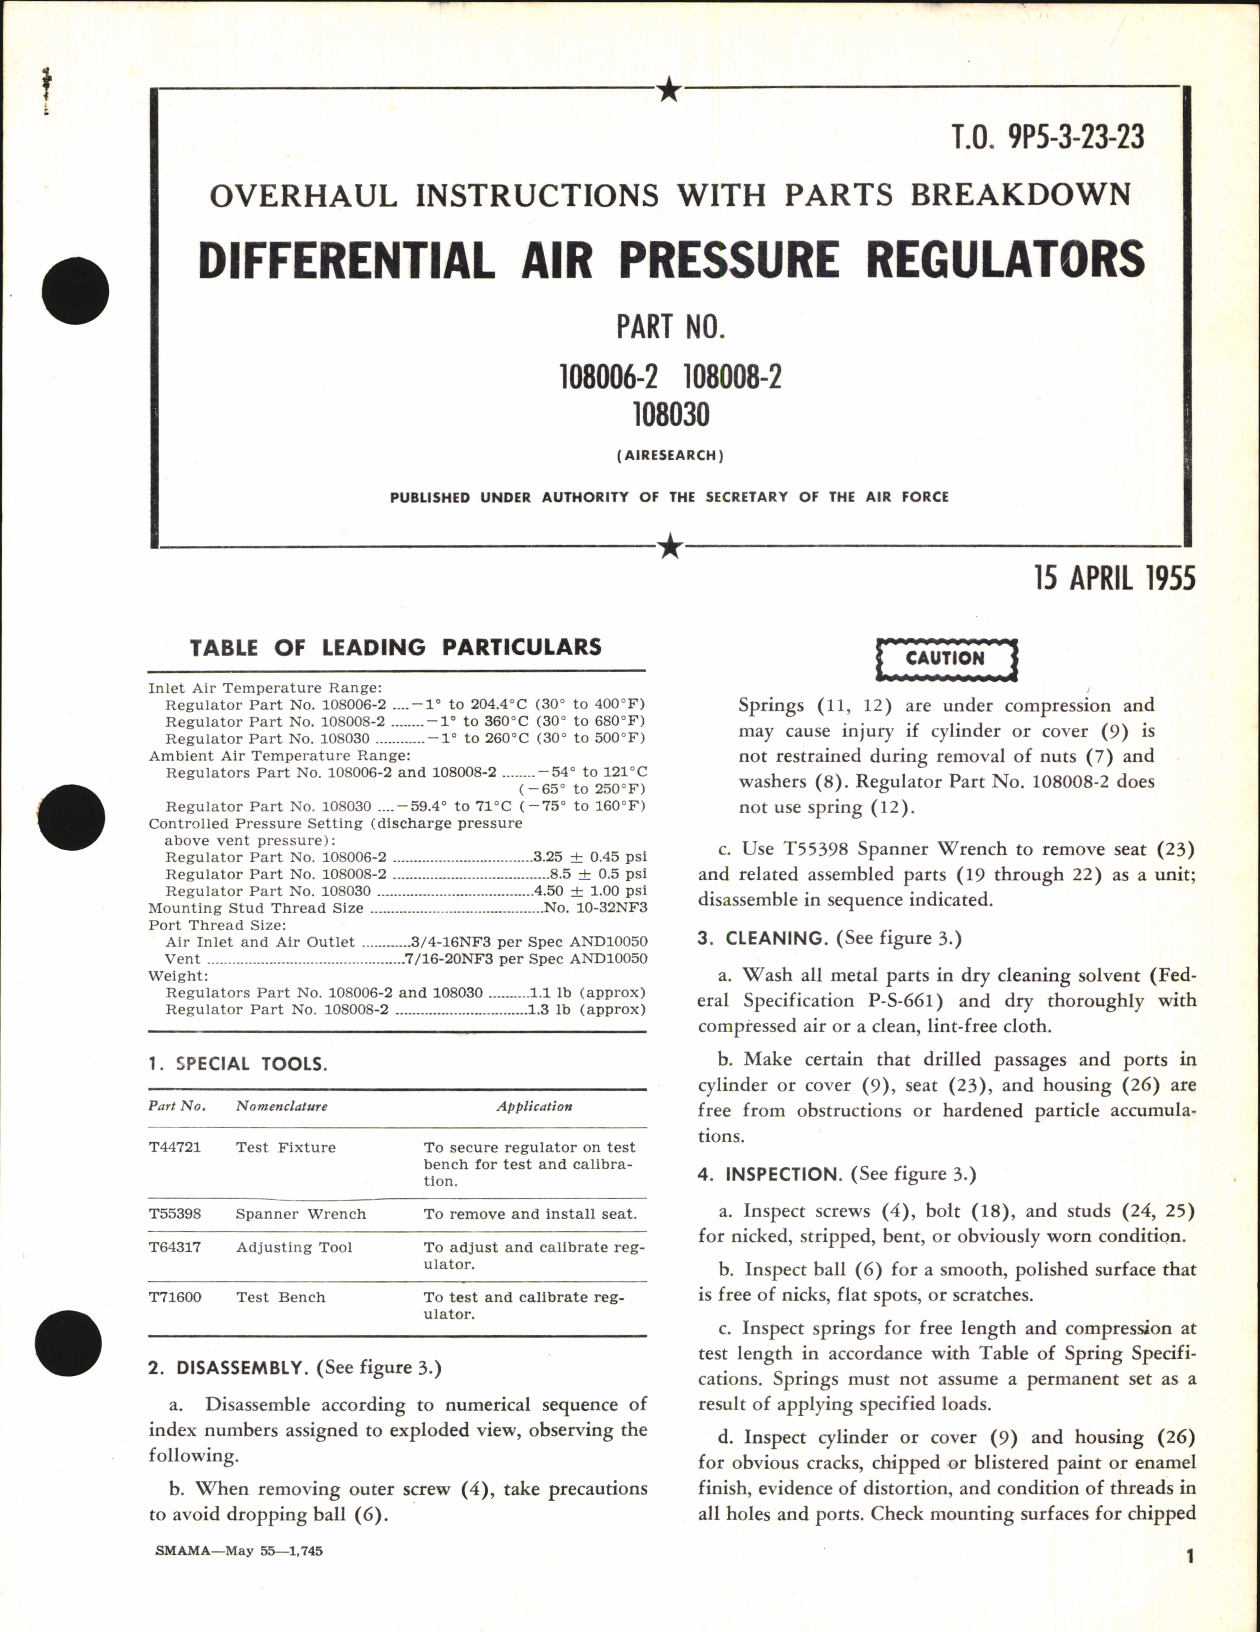 Sample page 1 from AirCorps Library document: Overhaul Instructions with Parts breakdown for Differential Air Pressure Regulators 